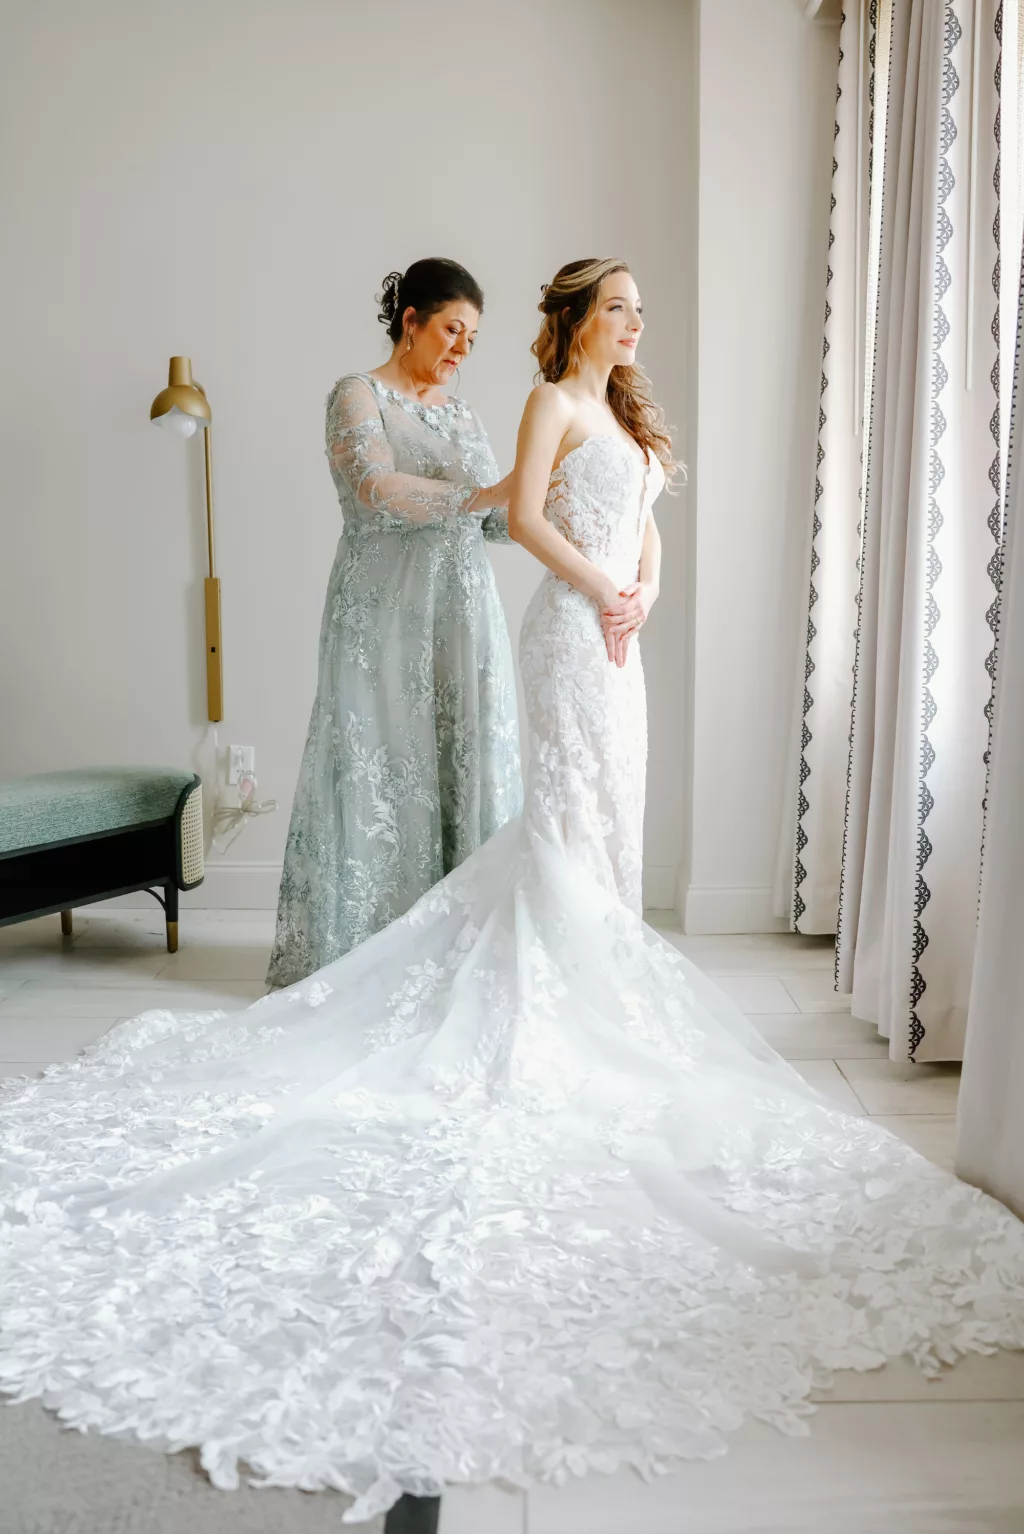 Bride and Mother Getting Ready Wedding Portrait | Strapless Nude and White Floral Lace Fit and Flare Wedding Dress Inspiration | St Pete Photographer Lifelong Photography Studio